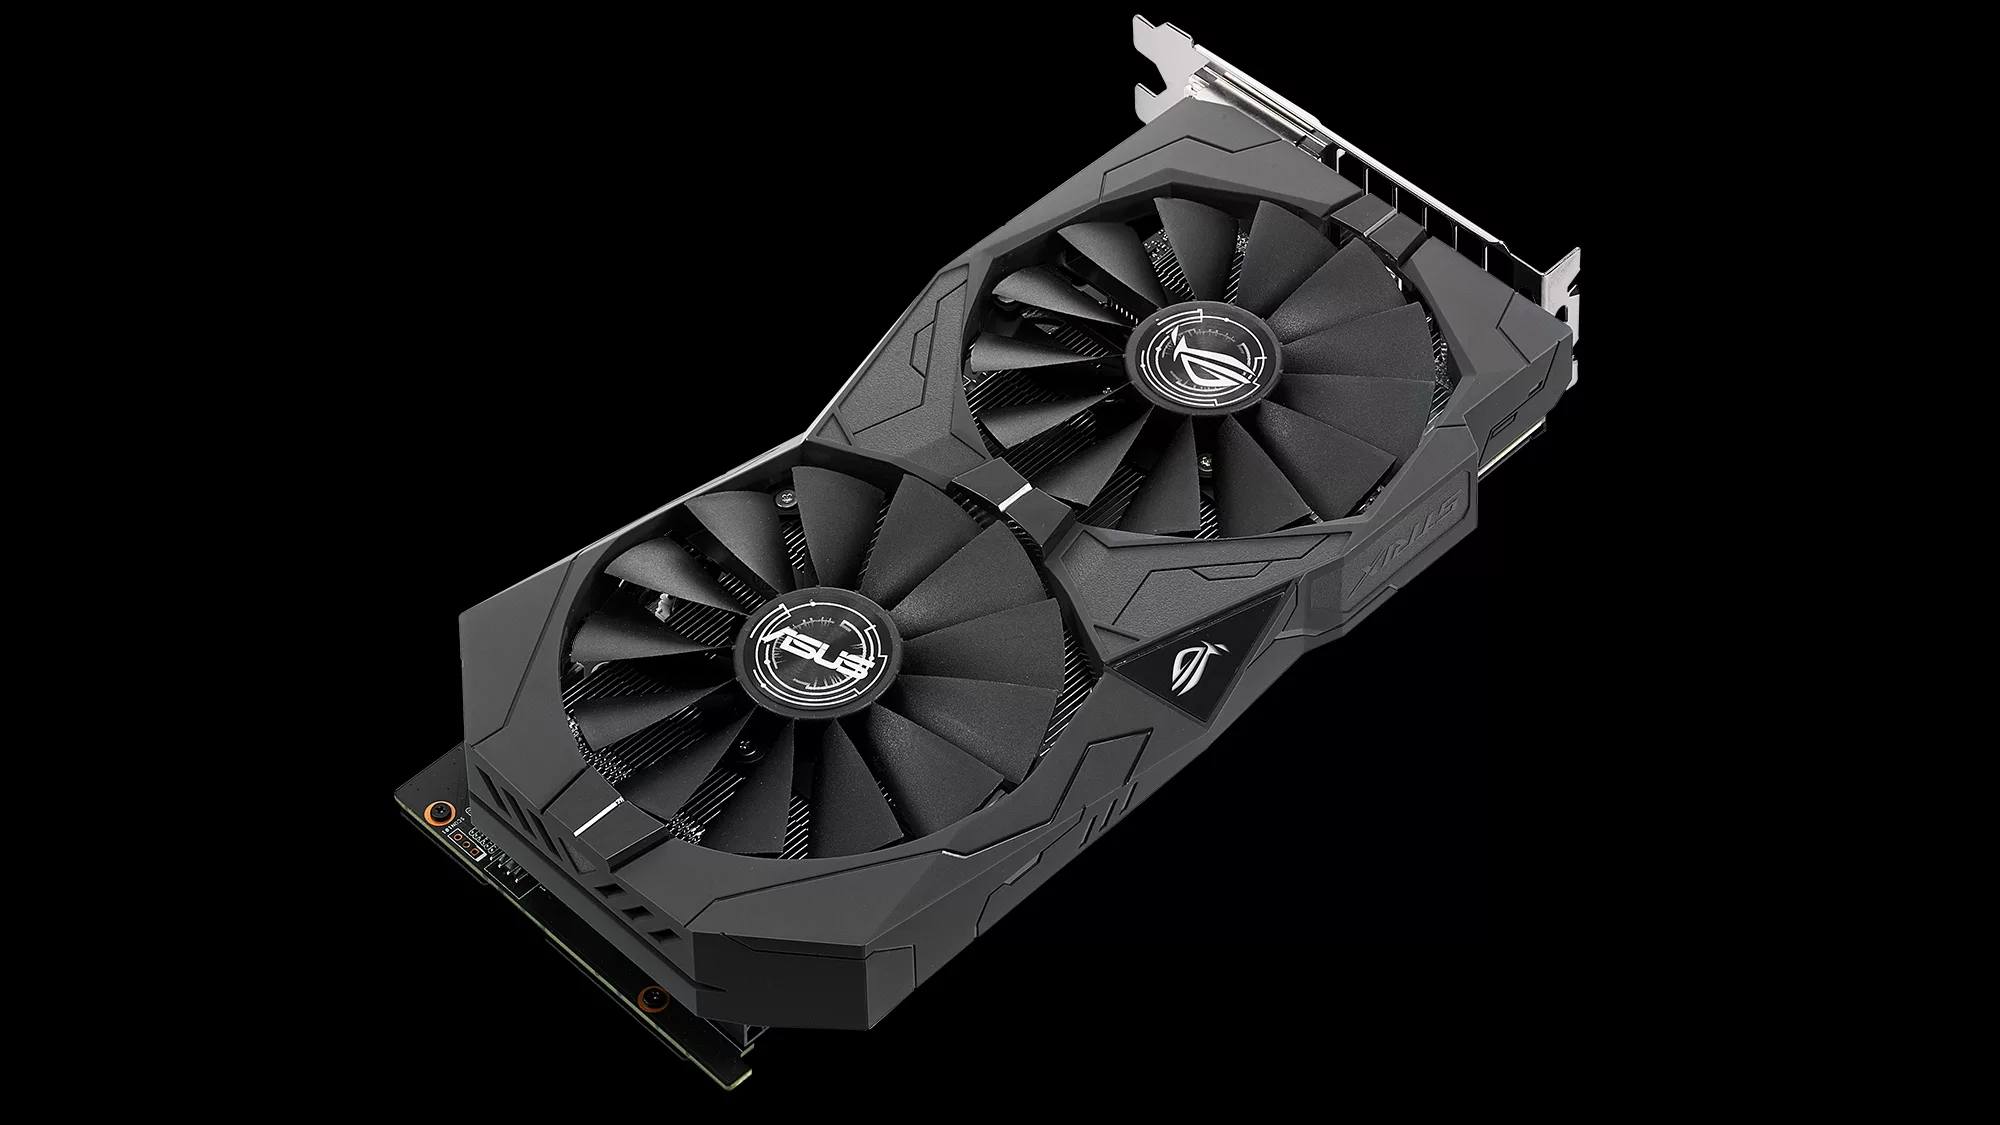 ASUS Announces Latest Line-Up of Graphics Cards Powered by NVIDIA GeForce  GTX 1050 GPUs | ROG - Republic of Gamers Global